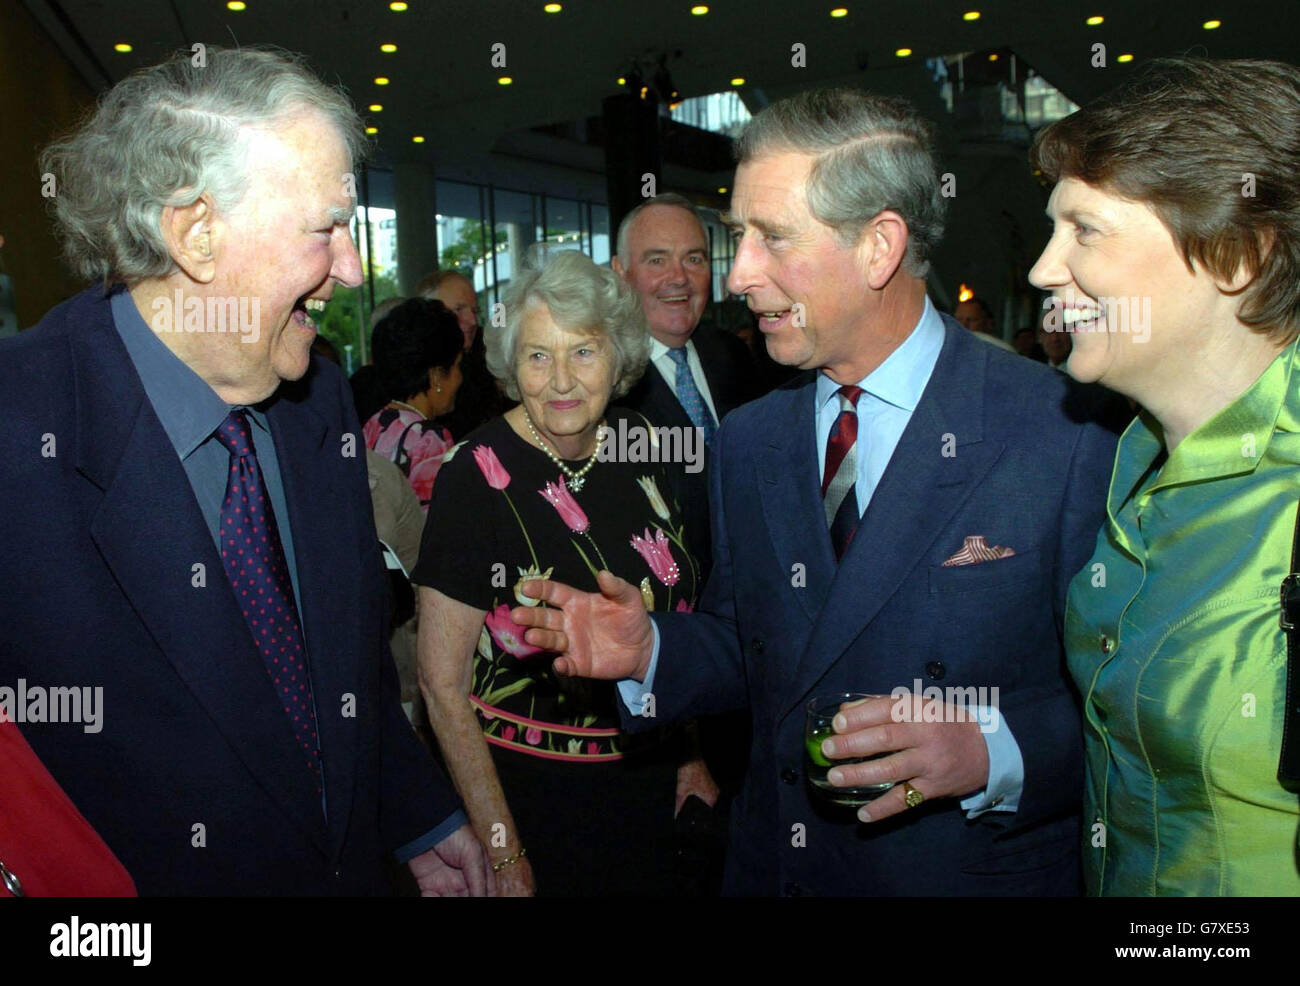 The Prince of Wales enjoys a chat with Sir Edmund Hillary, the first man to climb Mount Everest, and Helen Clark the New Zealand Prime Minister at the Aotea Centre reception. Stock Photo